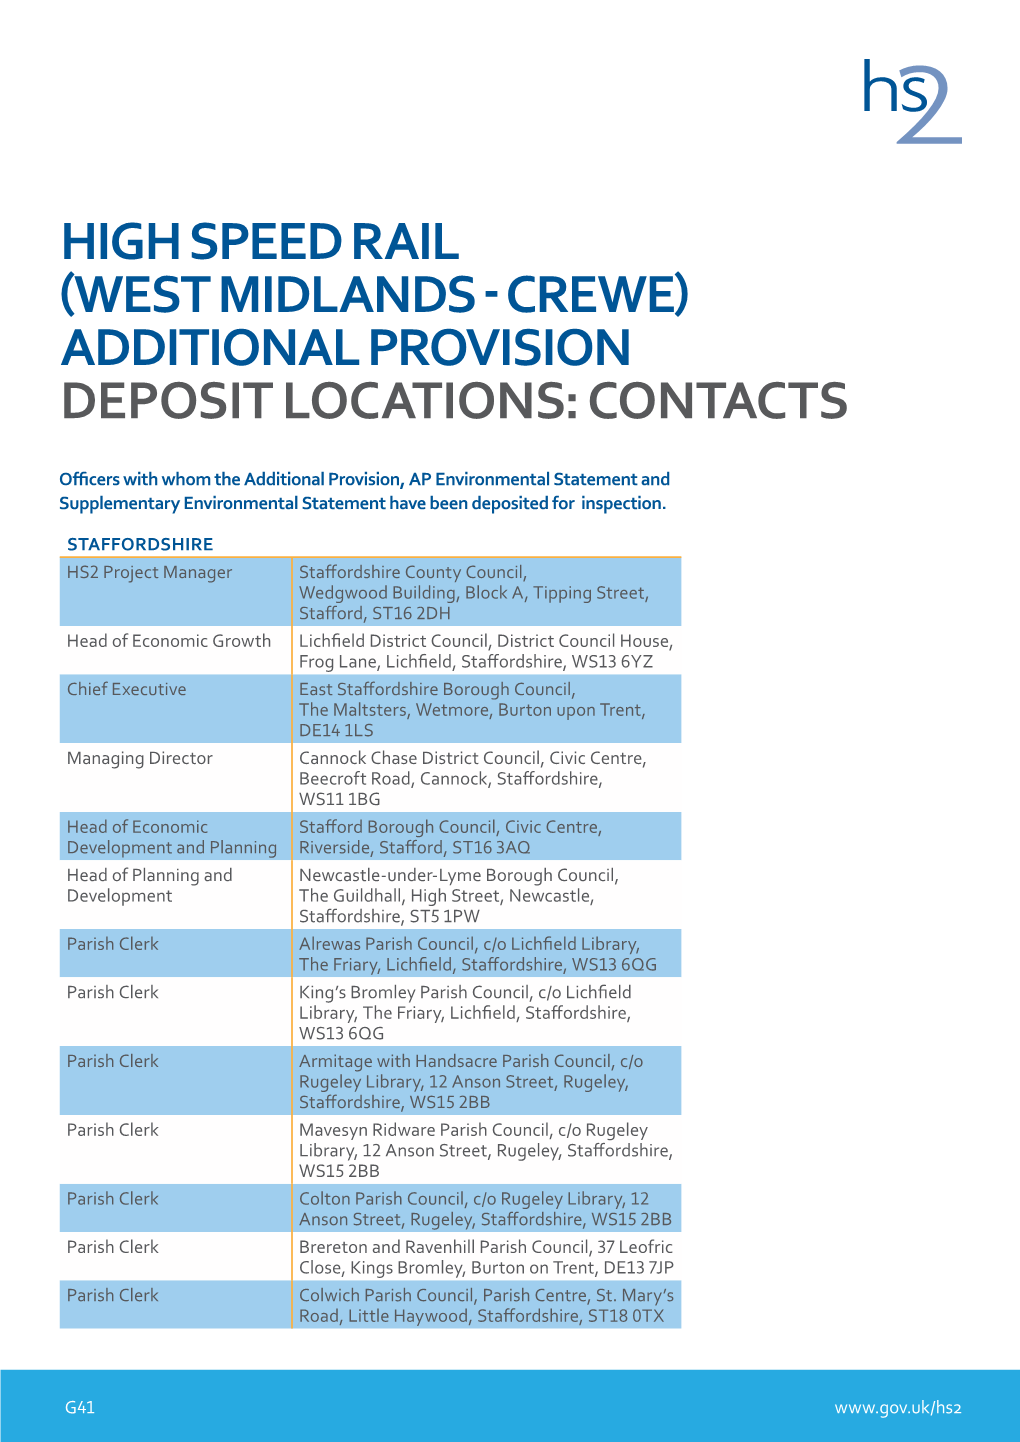 High Speed Rail (West Midlands - Crewe) Additional Provision Deposit Locations: Contacts